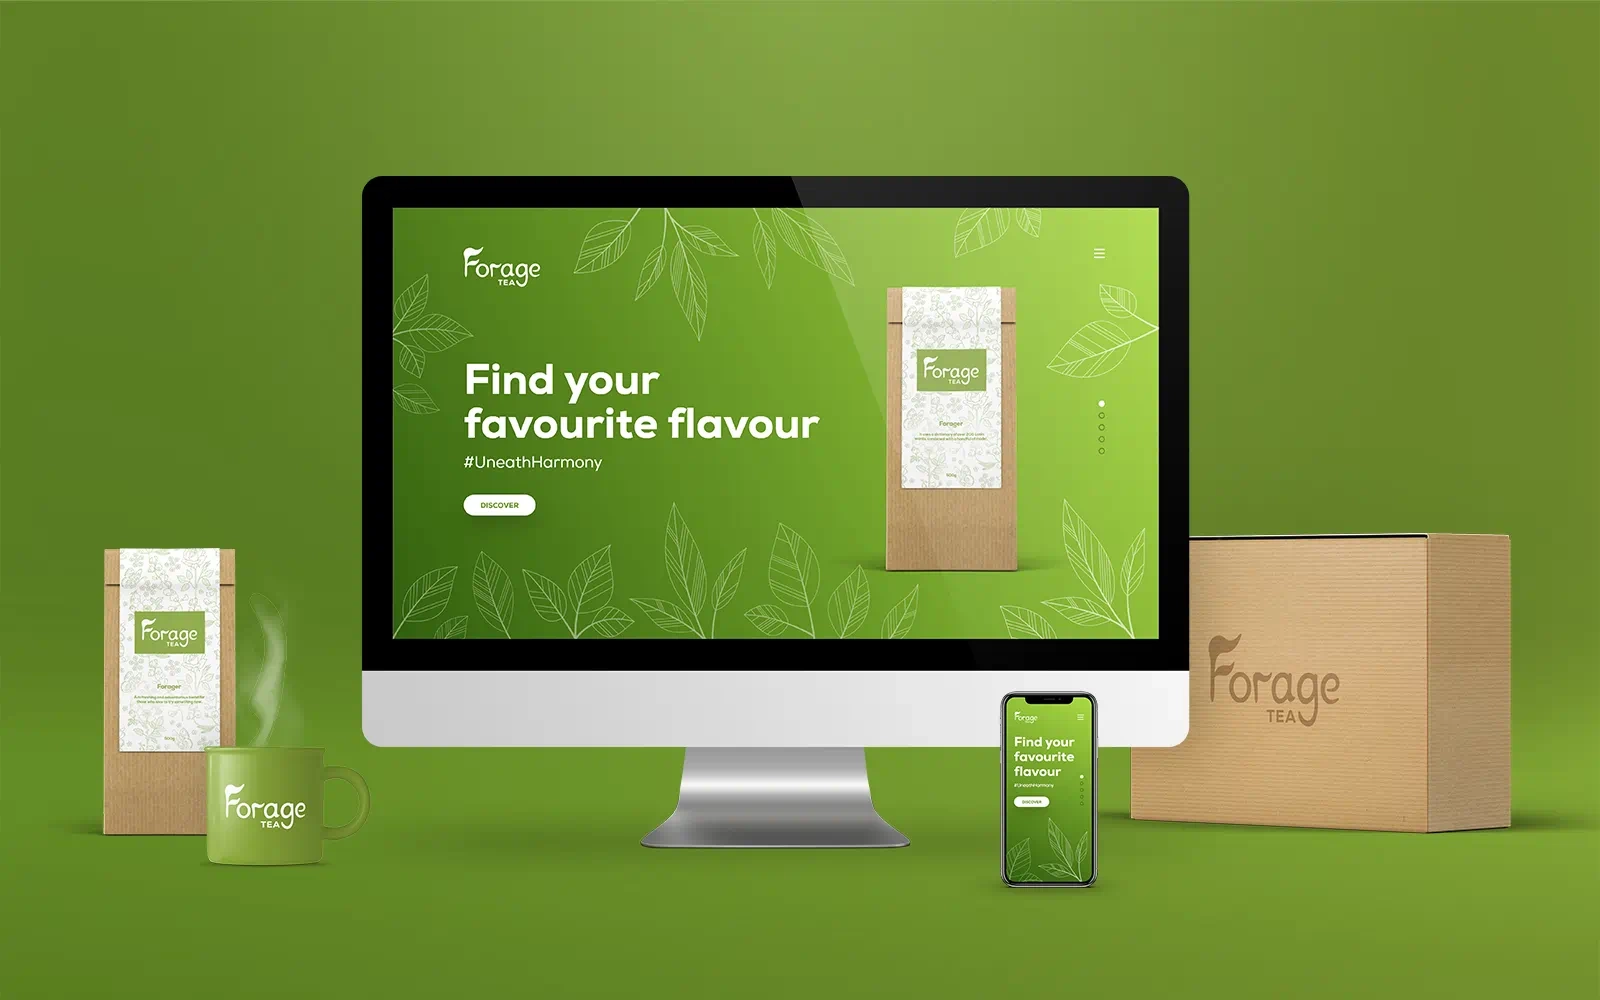 On a plain, green background is a modern computer showing a mockup of the Forage Tea website. Next to the computer are some packaging mockups together with a mockup of what the website would look like on mobile